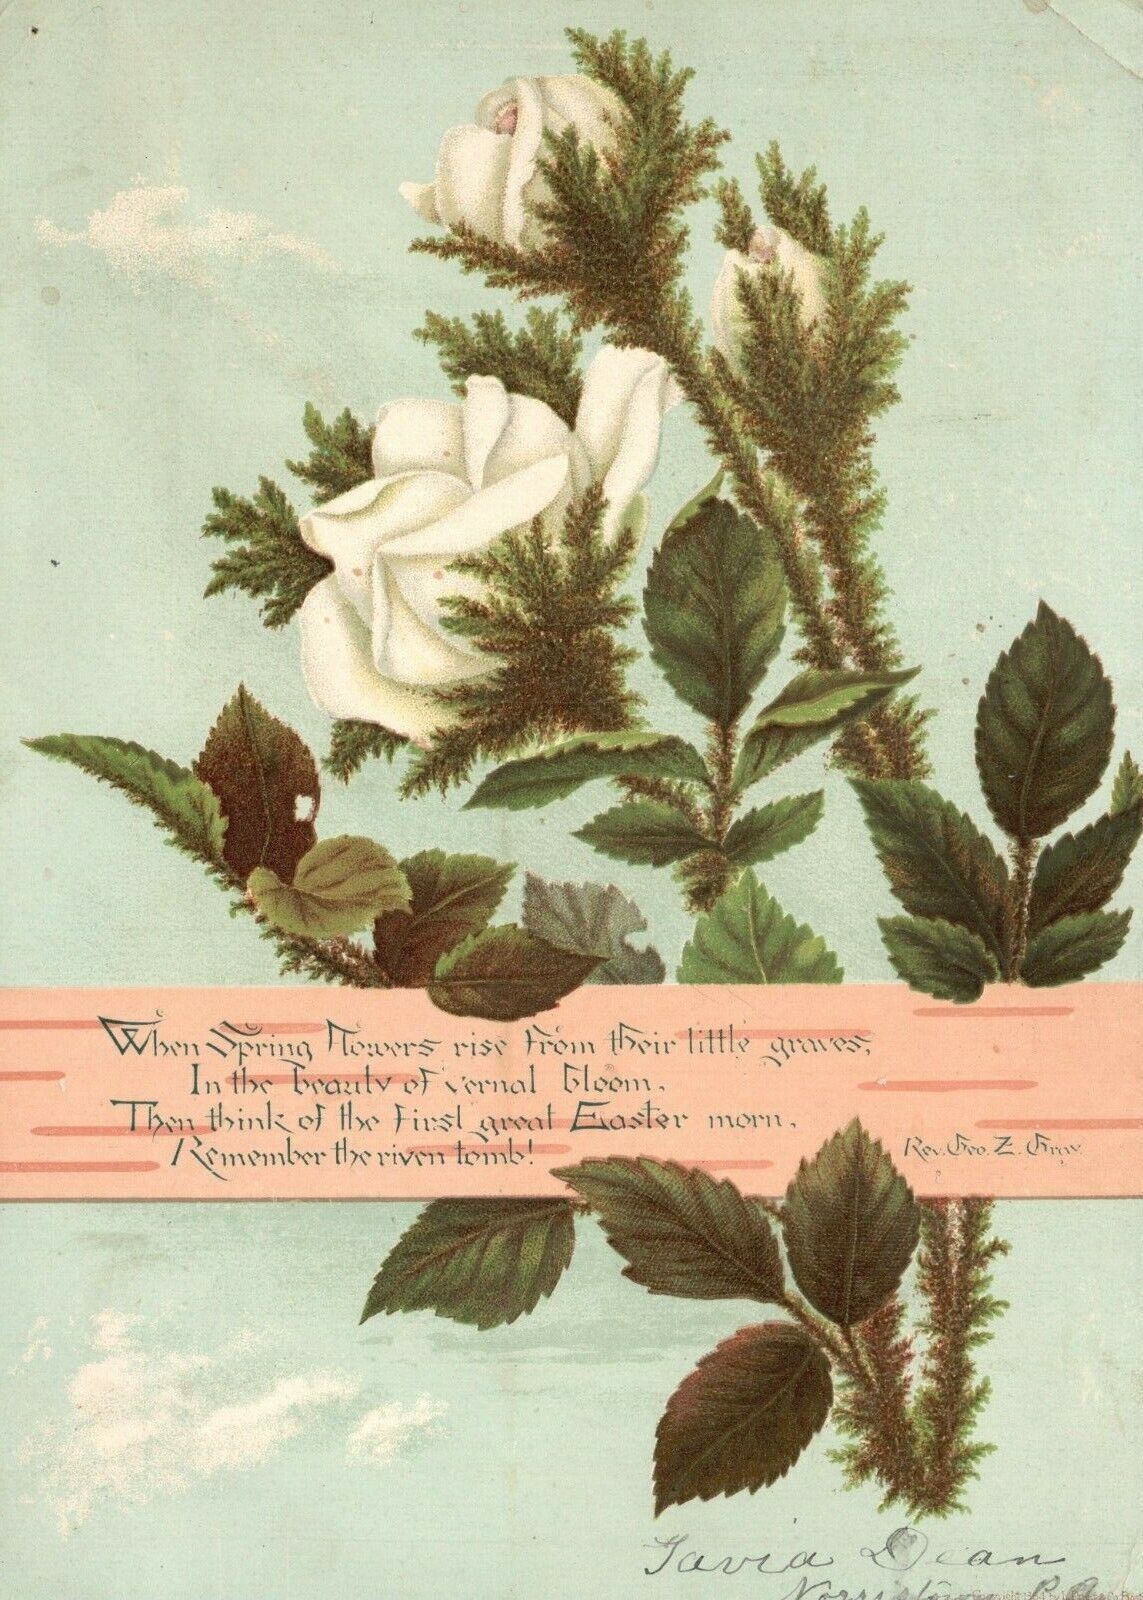 1880s-90s White Rose Flowers Greetings Spring Flowers Rise Trade Card